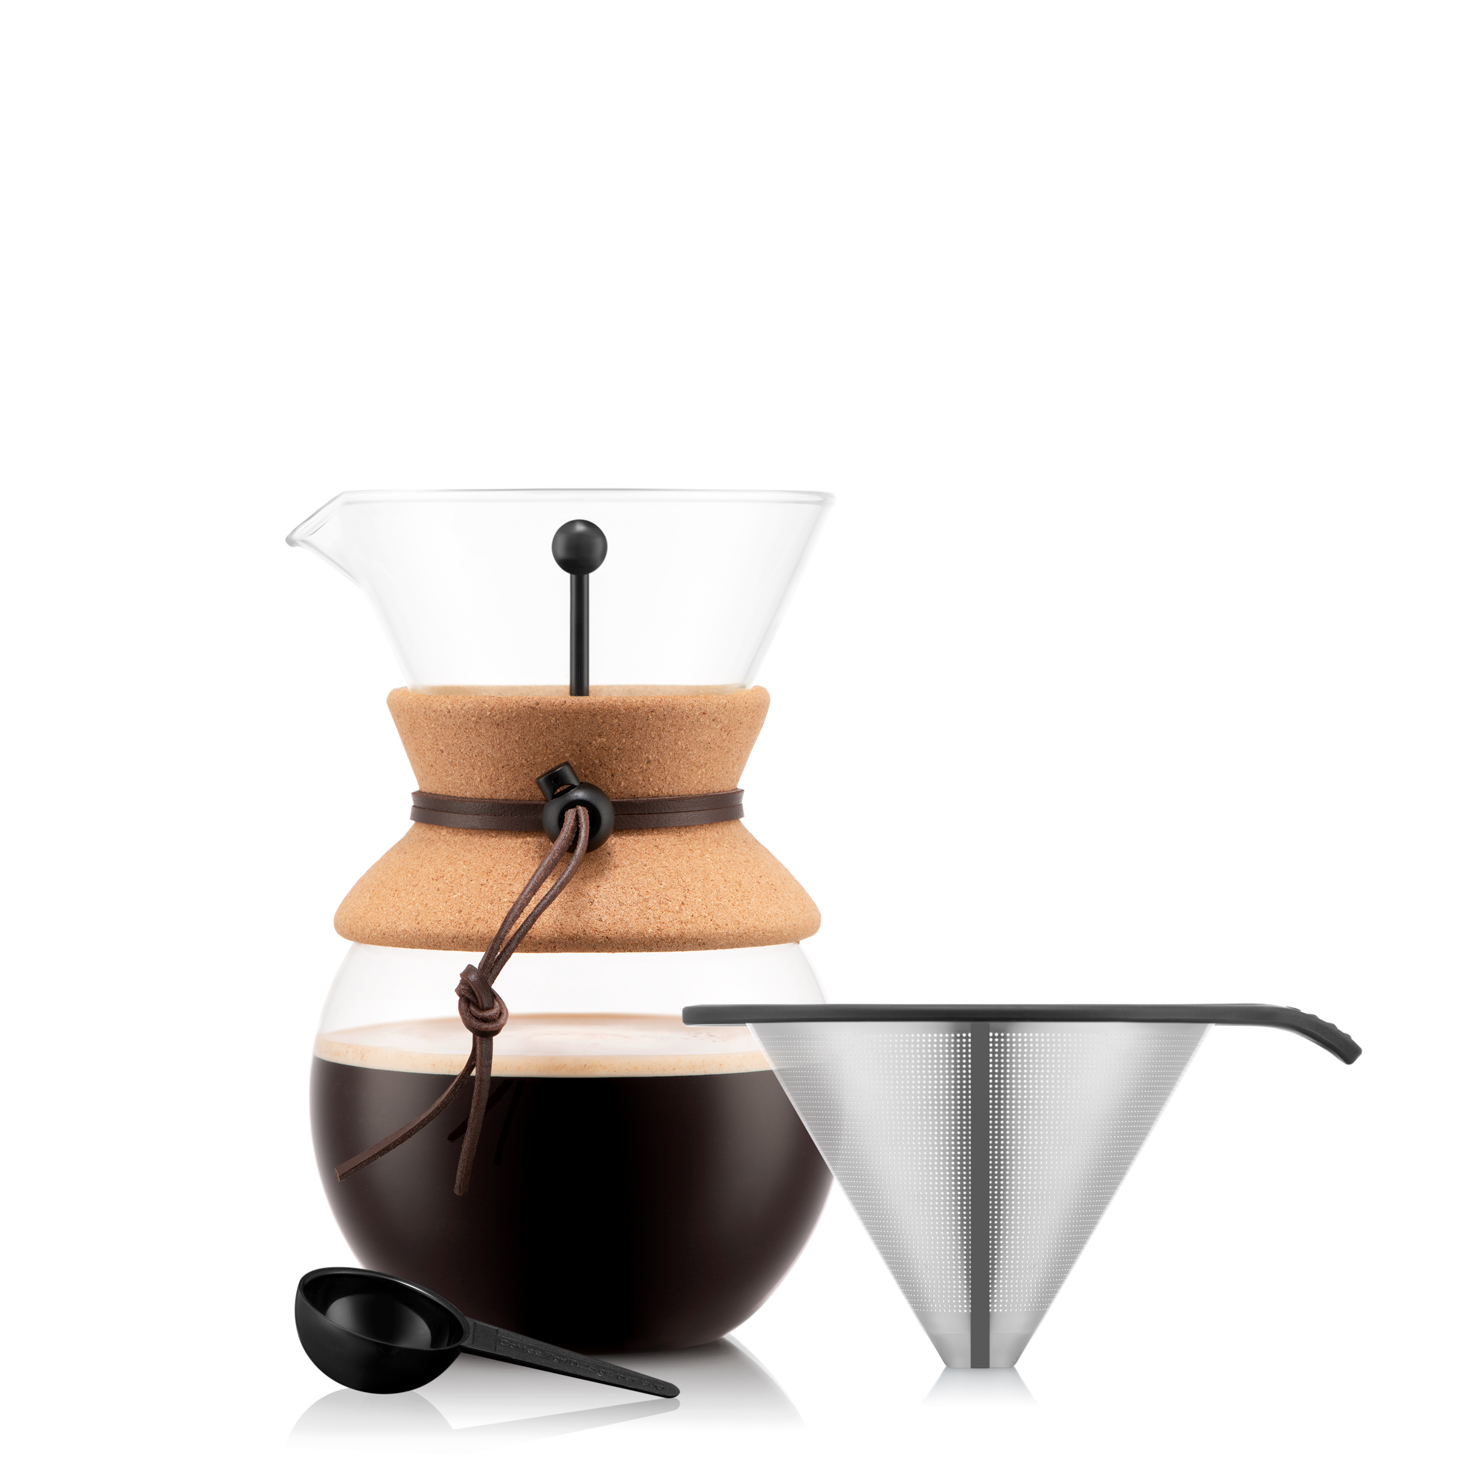 Bodum 34oz Pour Over Coffee Dripper w/ Reusable Stainless Steel Filter, Brown, Cork - image 1 of 11